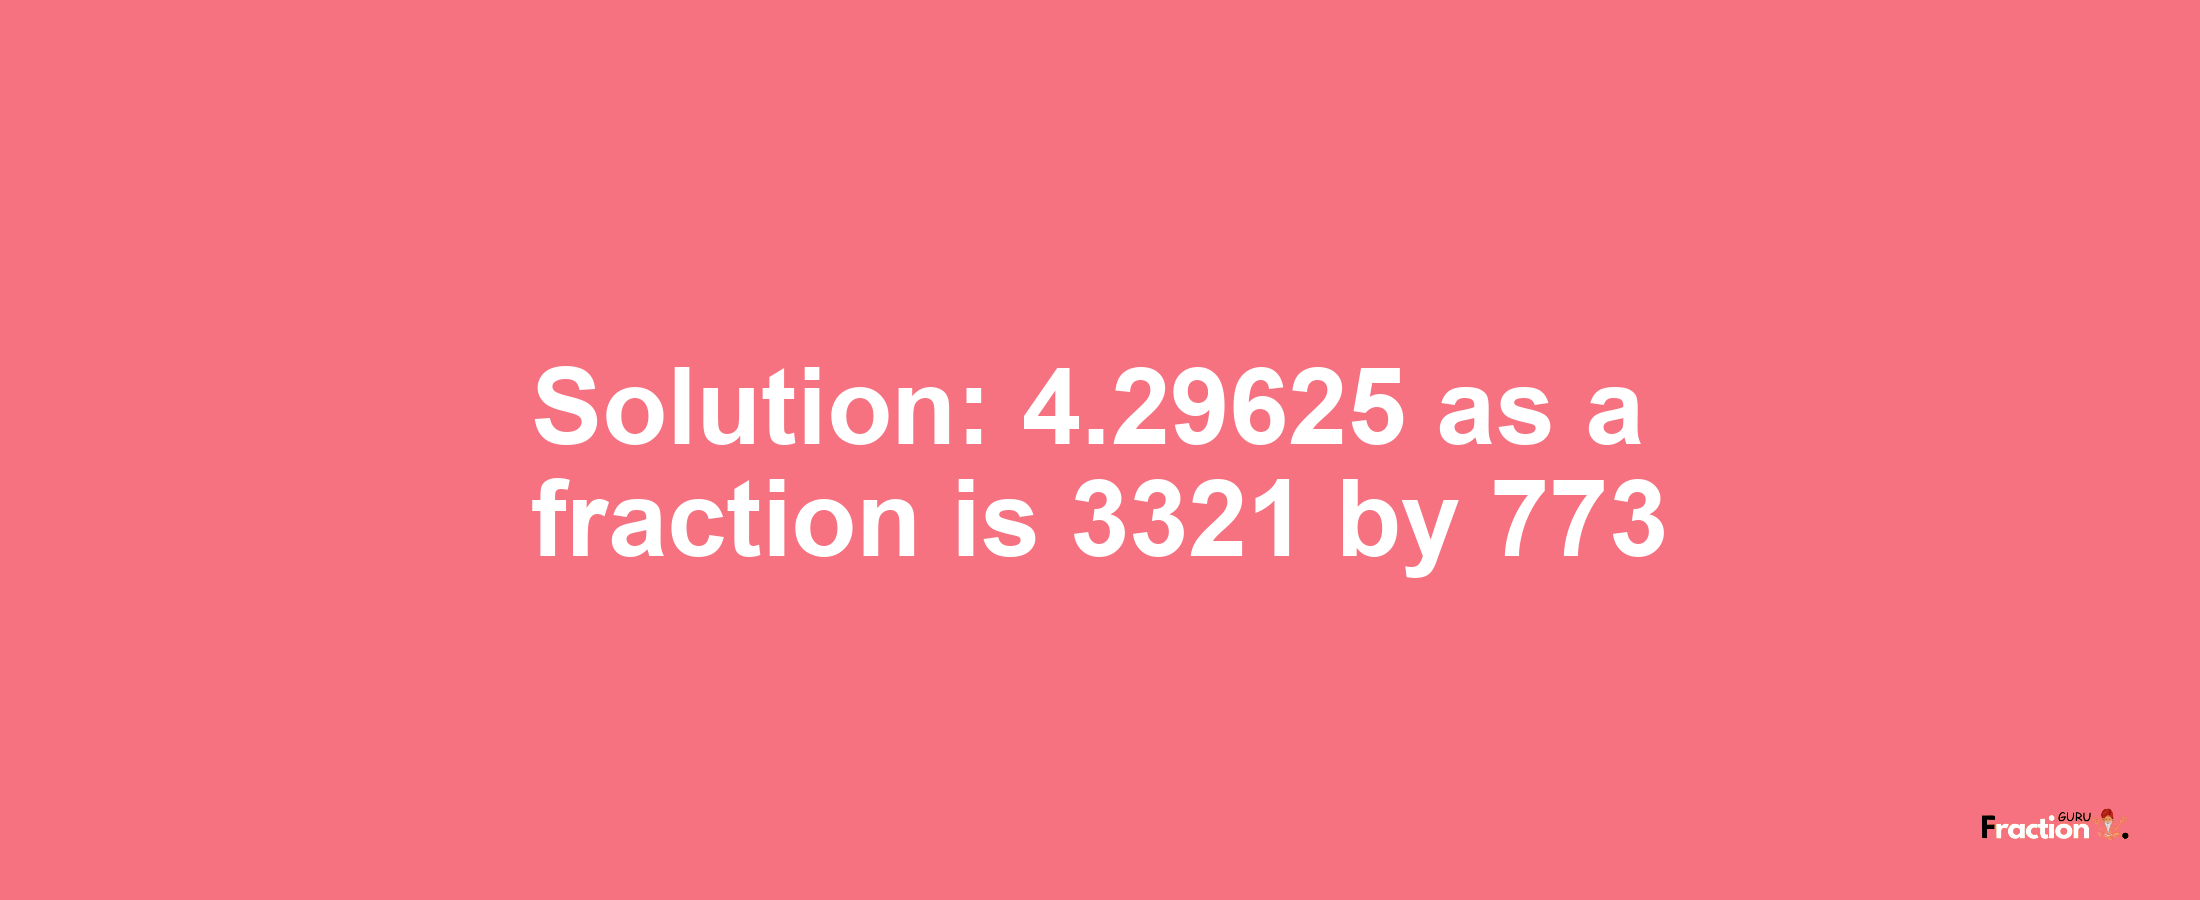 Solution:4.29625 as a fraction is 3321/773